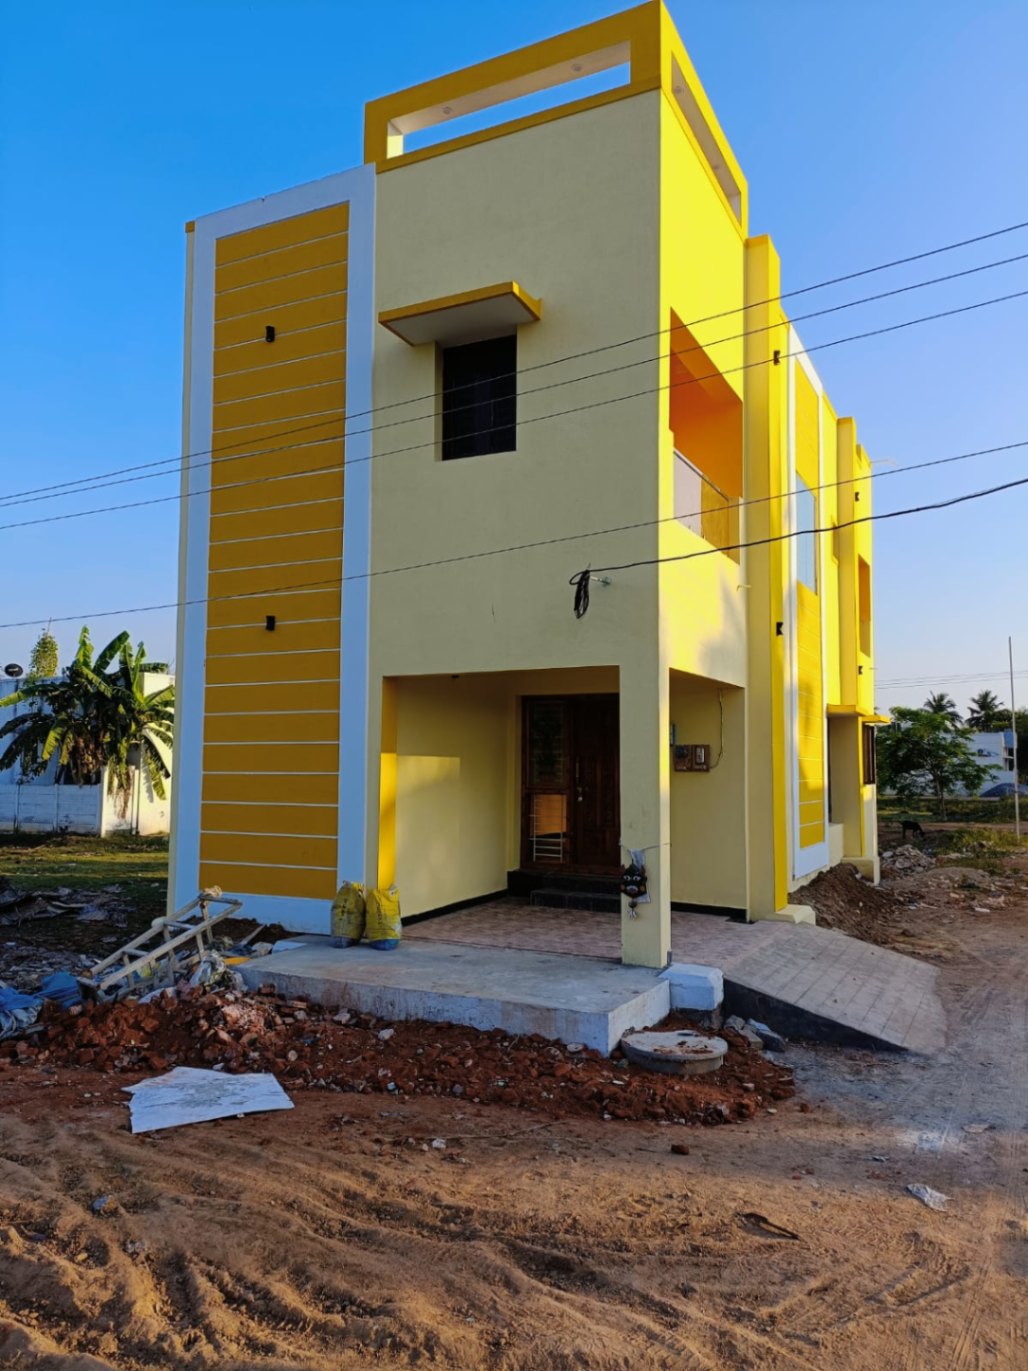 3 Bed/ 2 Bath Sell House/ Bungalow/ Villa; 1,750 sq. ft. carpet area; 1,000 sq. ft. lot for sale @Chettiyapatti